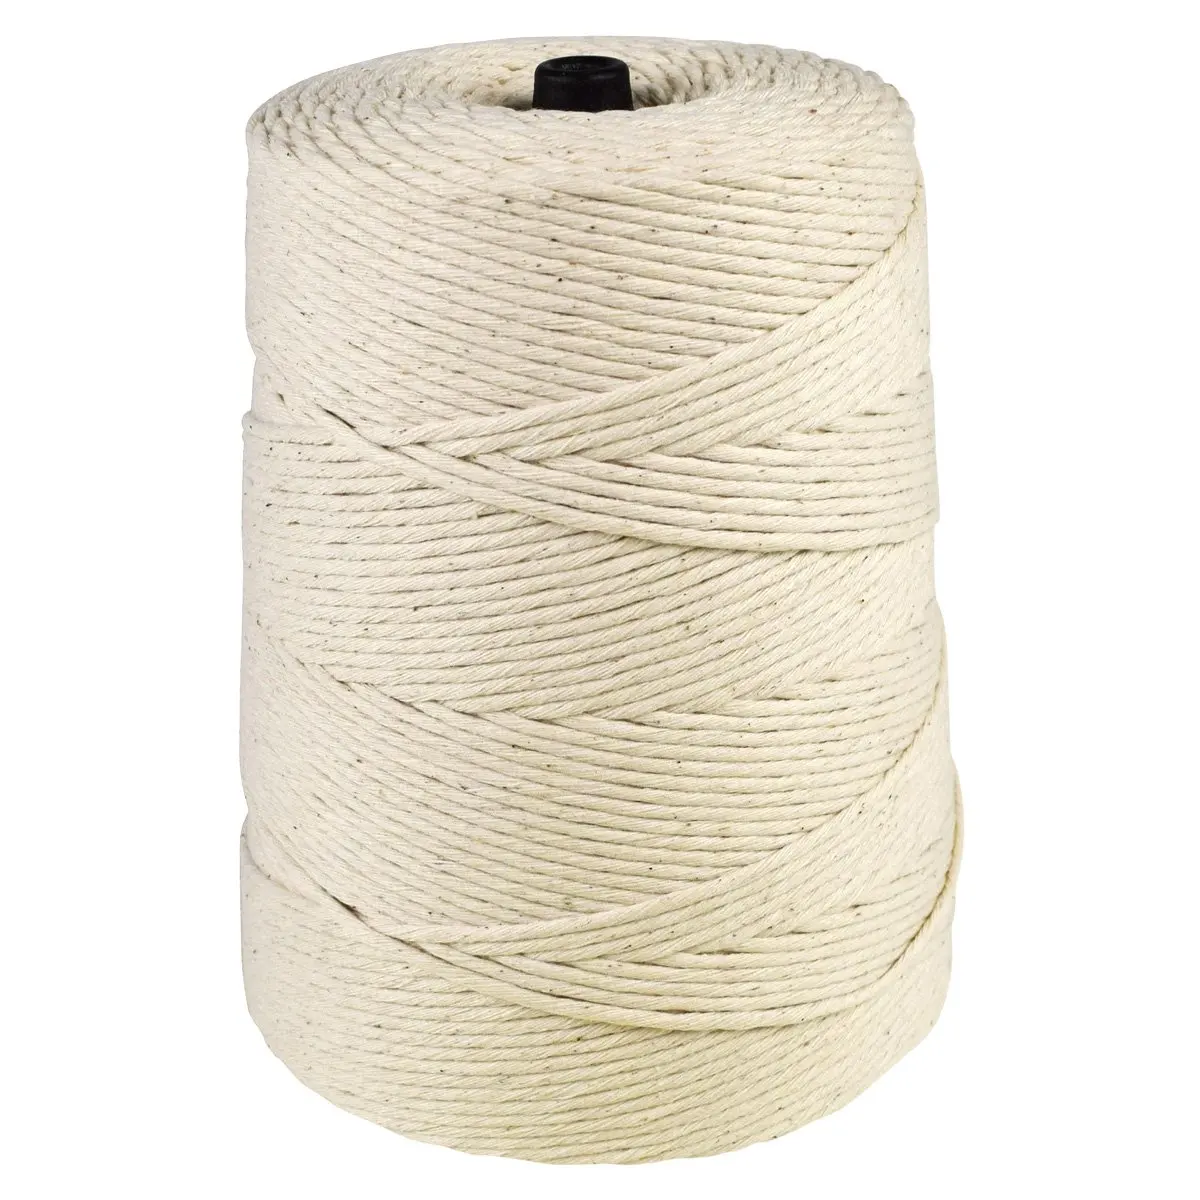 GoodCook Natural Cotton Cooking and Crafting Twine Ball - 300 ft